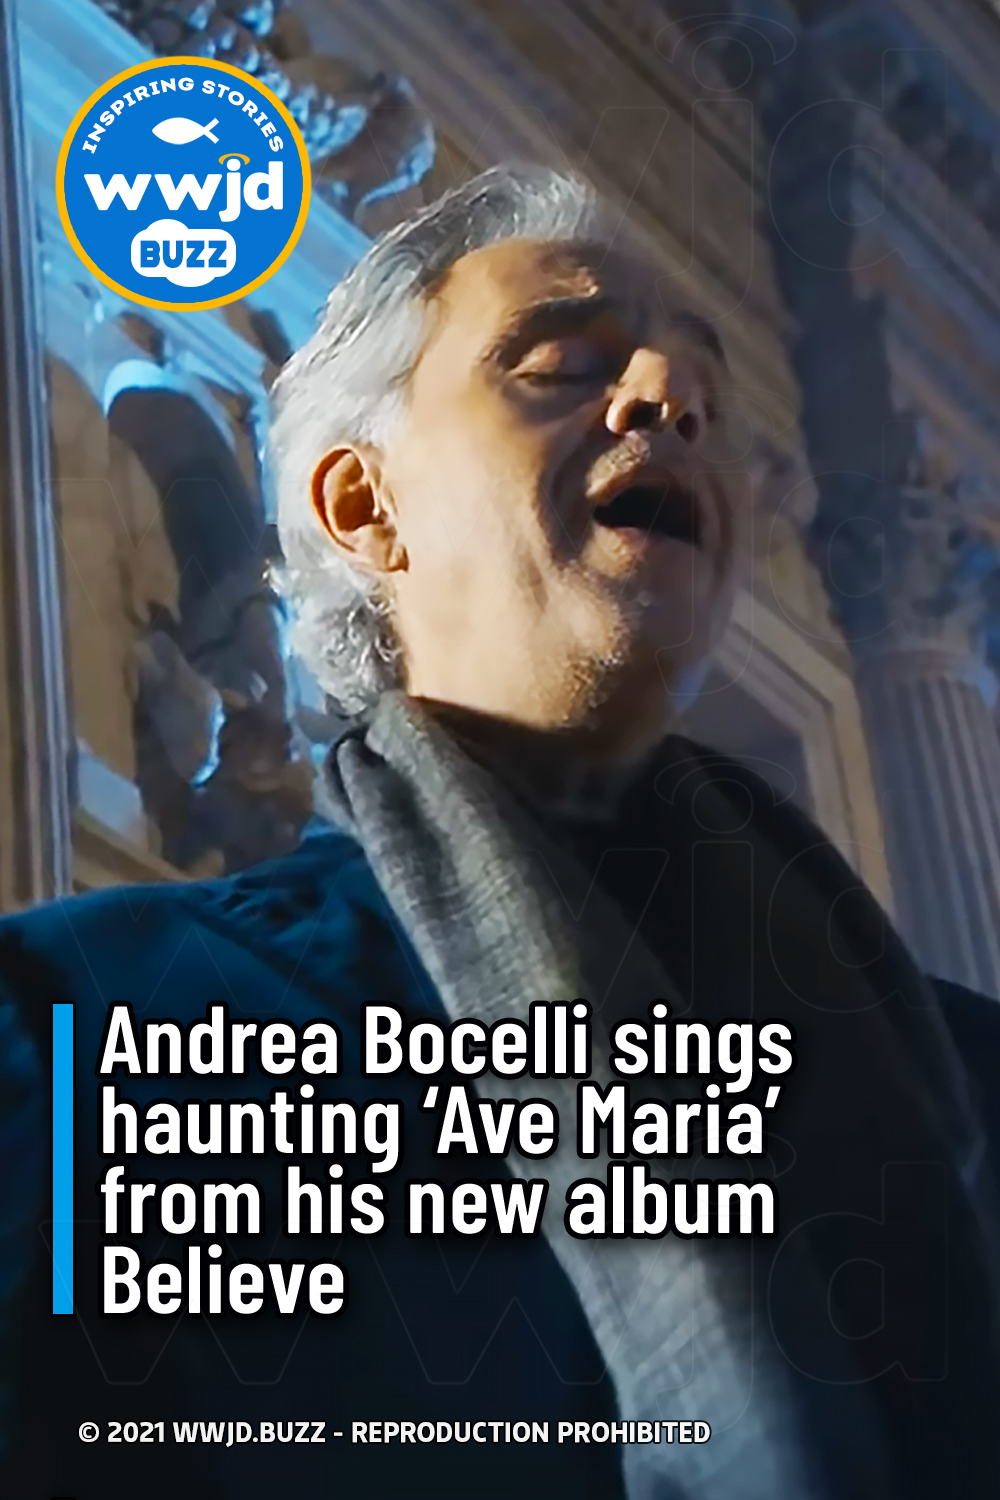 Andrea Bocelli sings haunting ‘Ave Maria’ from his new album Believe